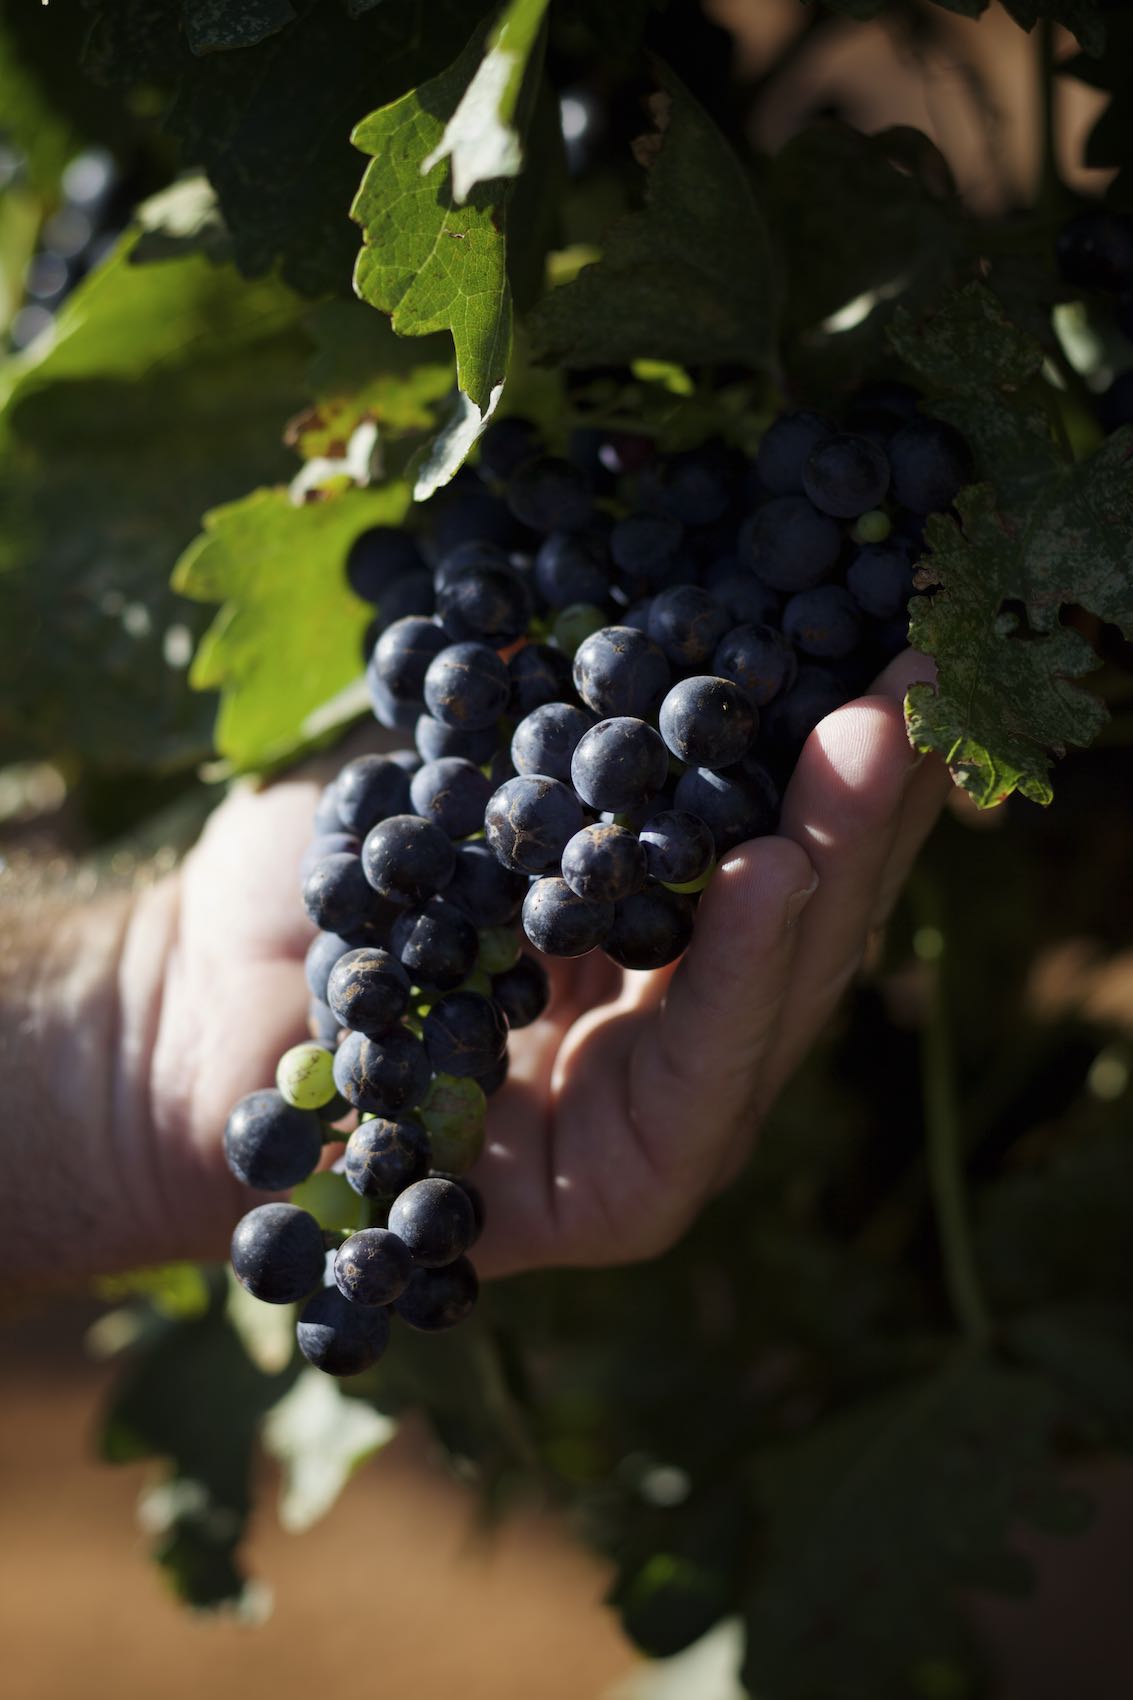 Jody Horton Photography - Hand holding a cluster of dark grapes on the vine.